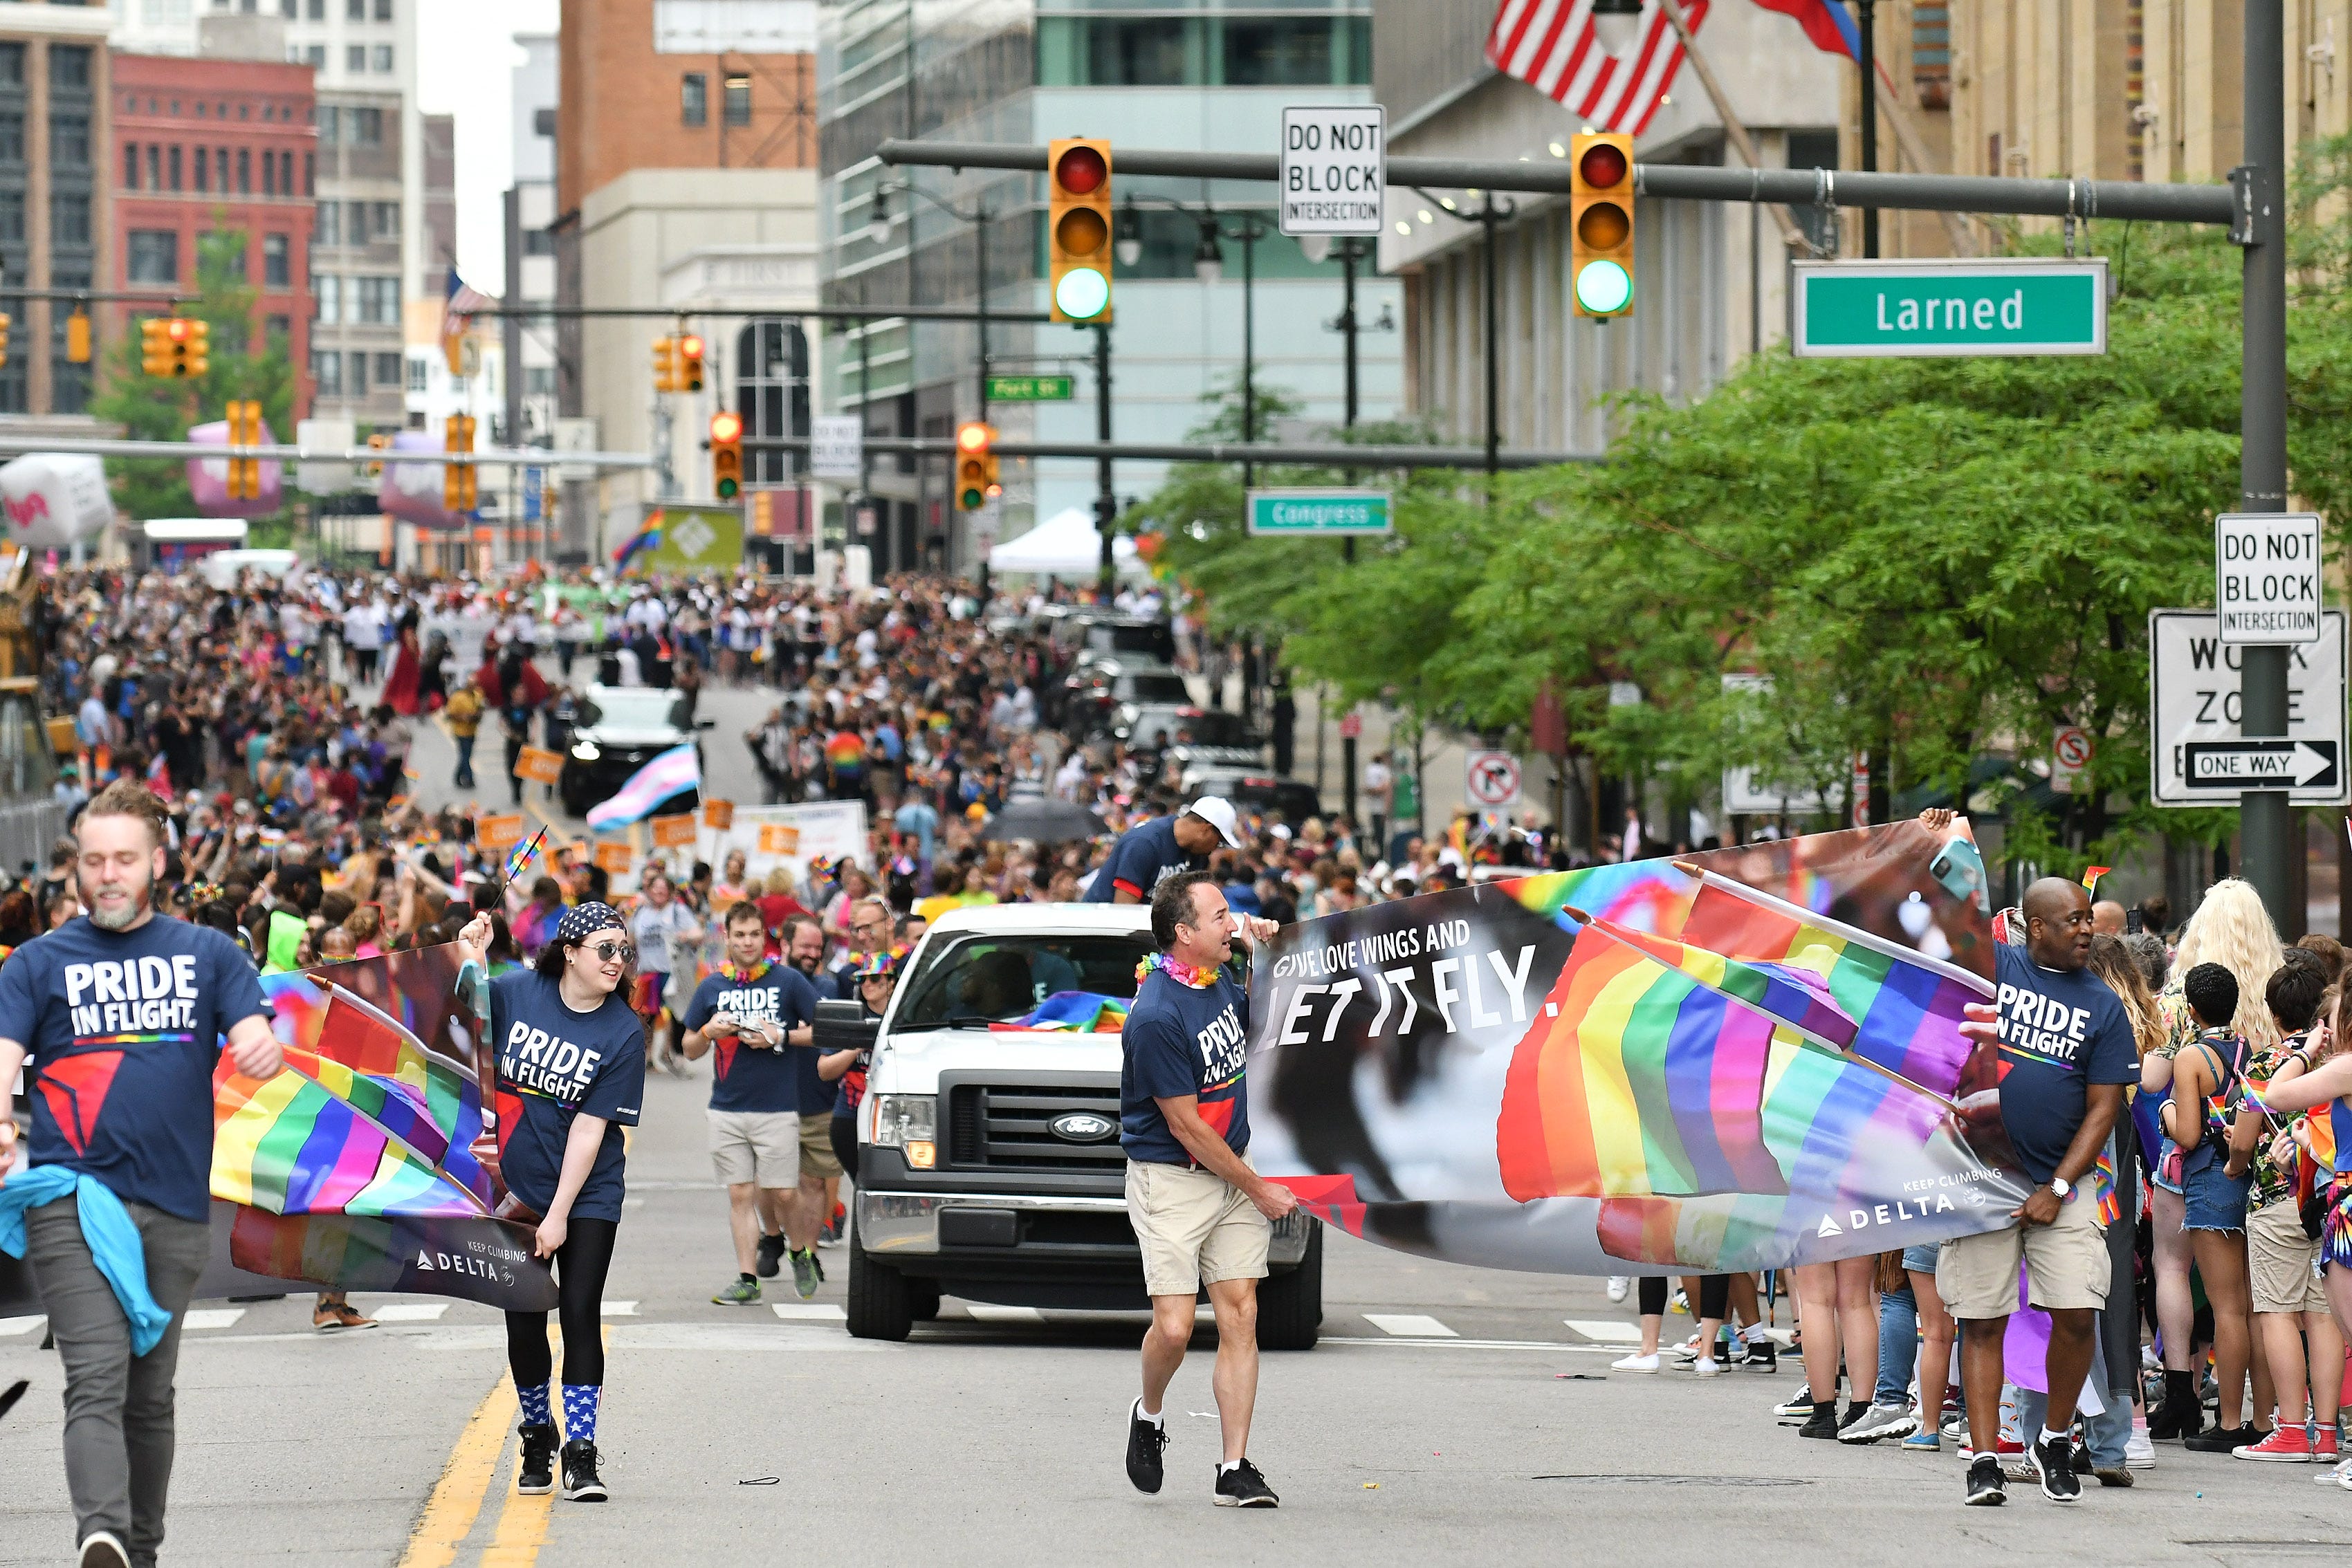 A group from Delta walks in Motor City Pride Parade on Griswold Street in Detroit on June 9, 2019.